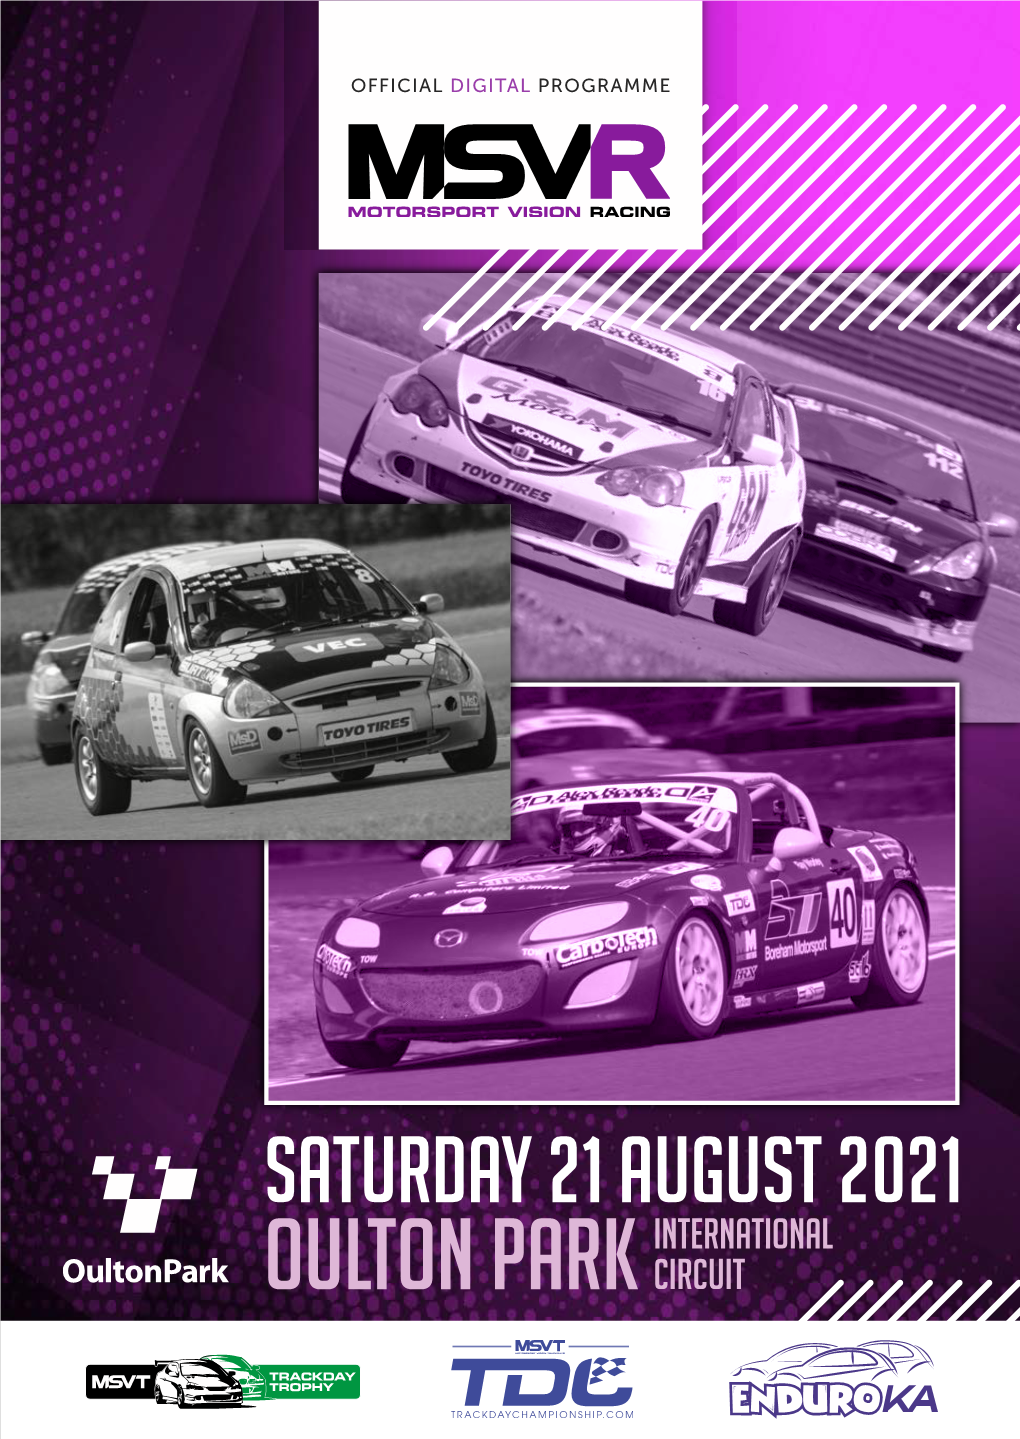 Saturday 21 AUGUST 2021 INTERNATIONAL OULTON PARK CIRCUIT an AUGUST BANK HOLIDAY of HISTORIC RACING in CHESHIRE TIMETABLE